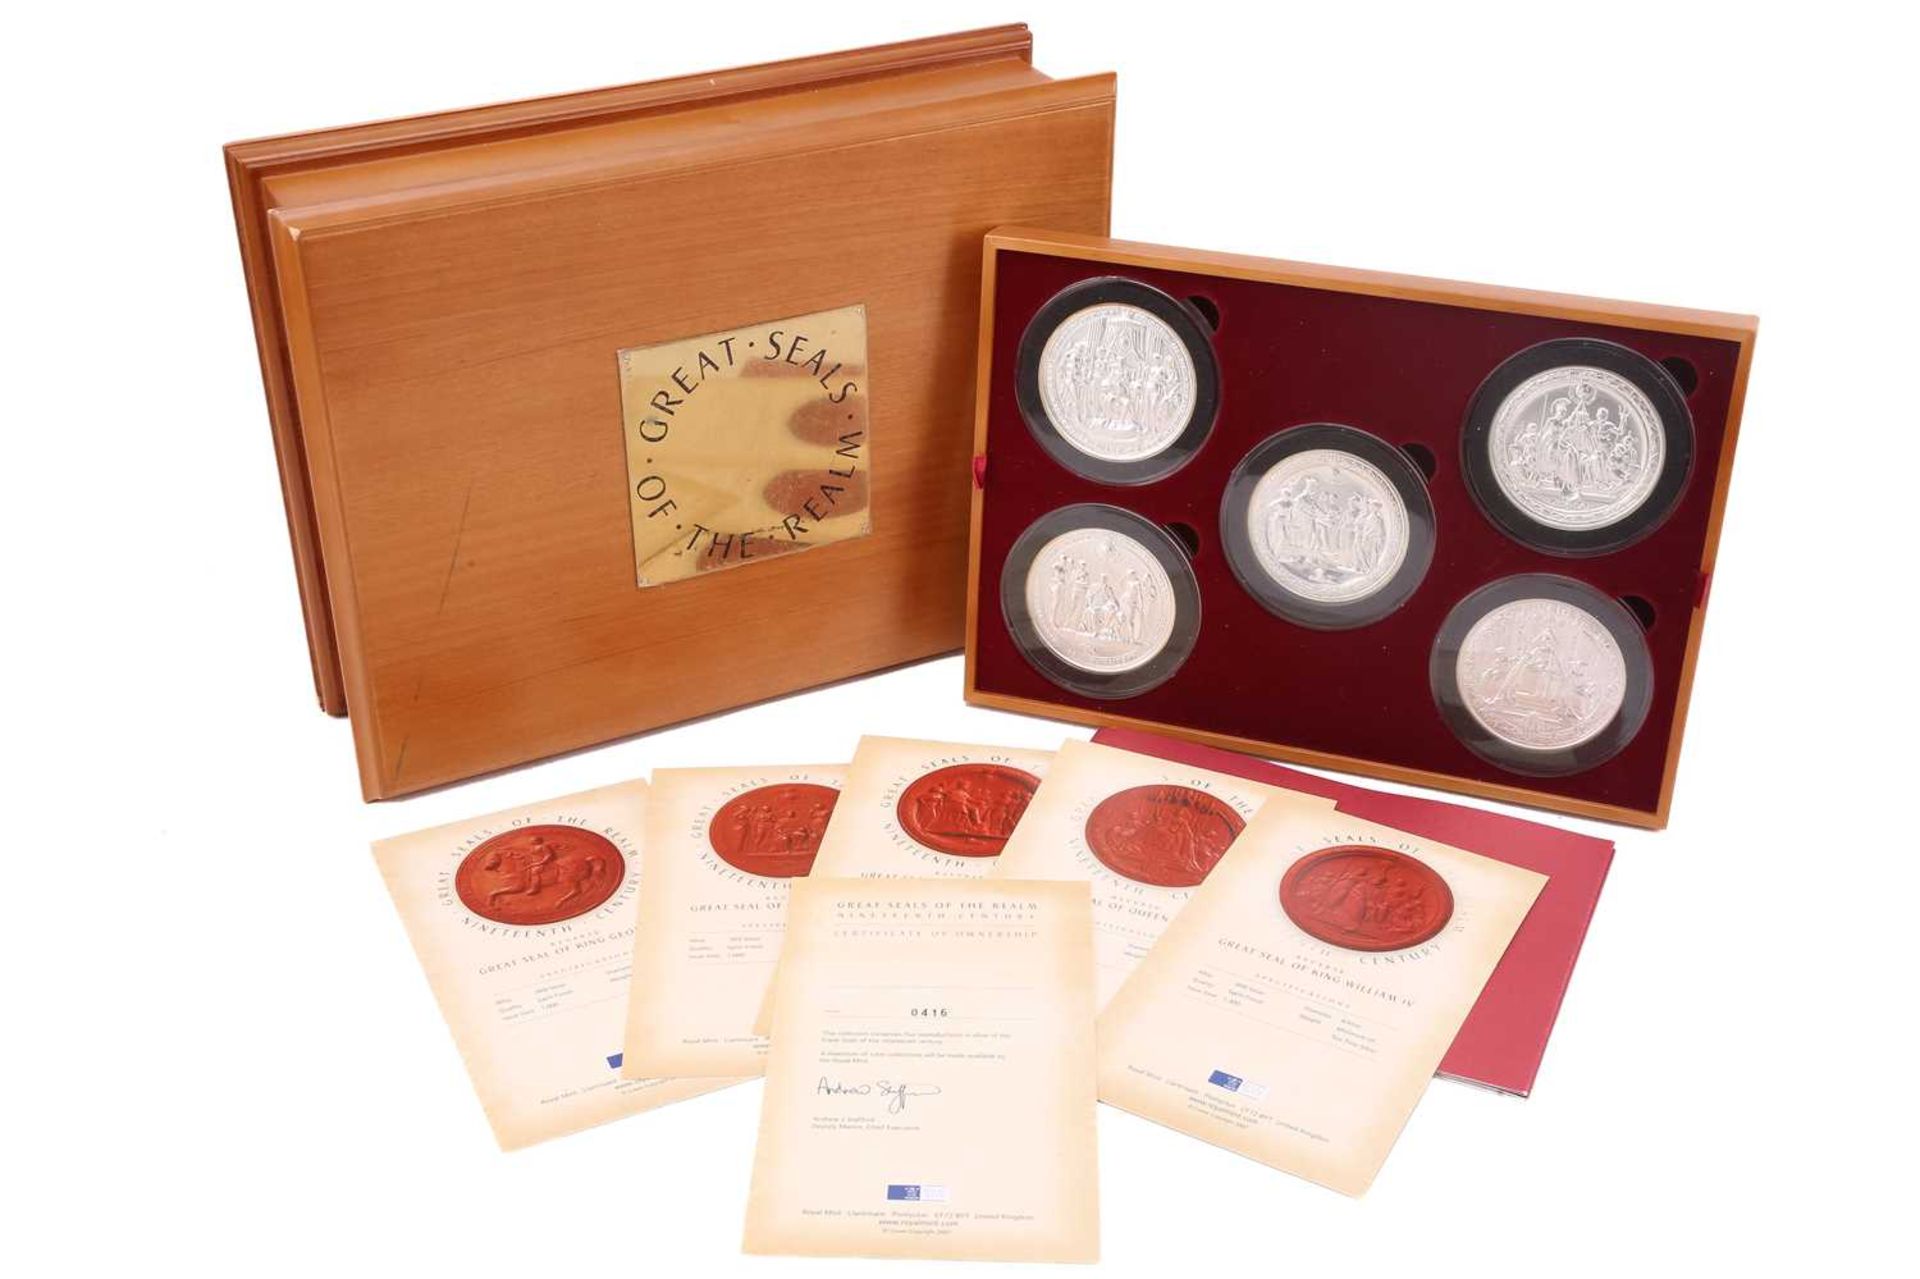 Royal Mint - Great Seals of the Realm 19th century, five silver encapsulated coins, no 0416, issue